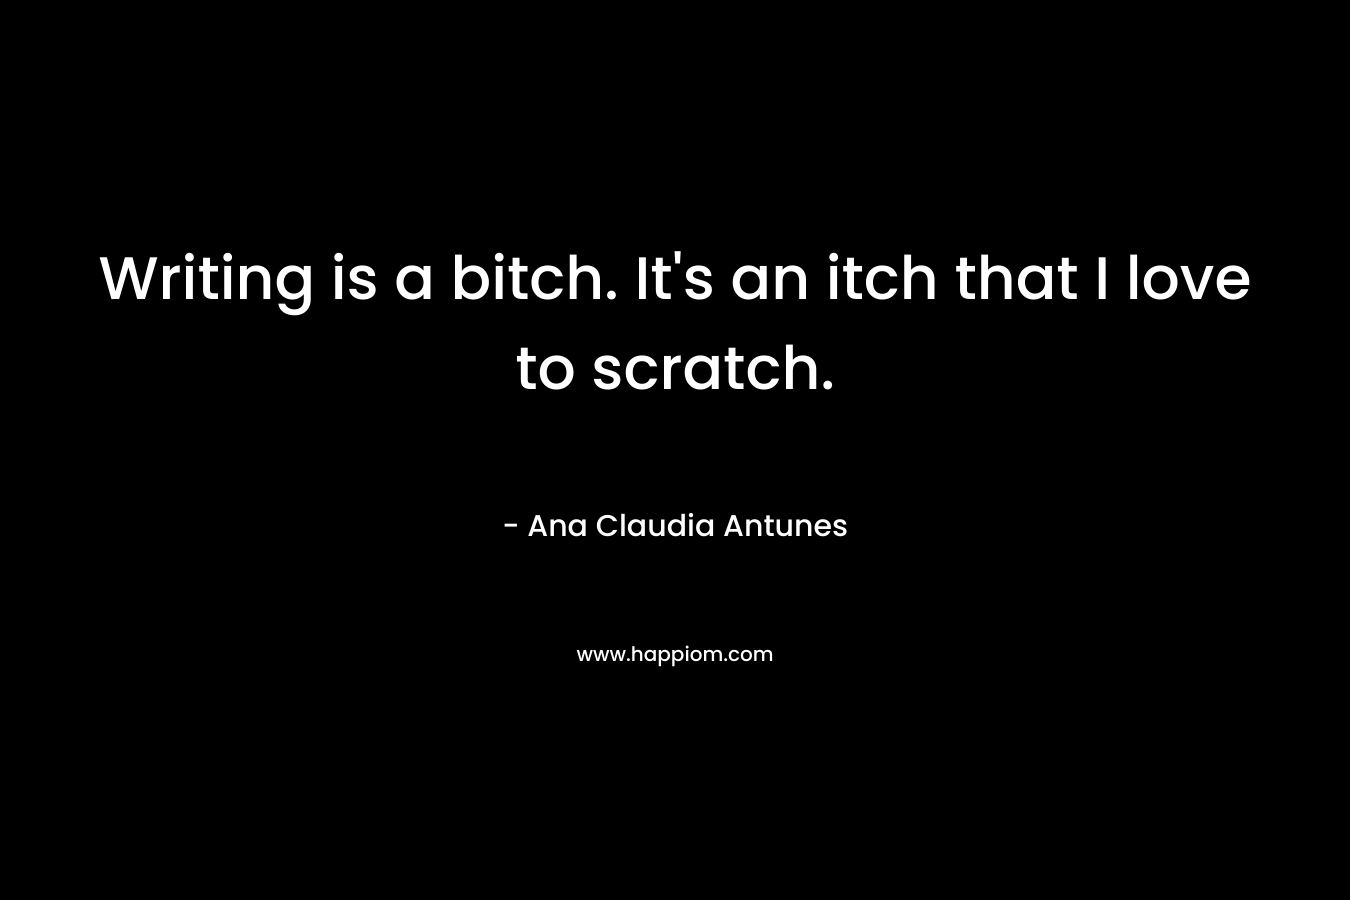 Writing is a bitch. It's an itch that I love to scratch.